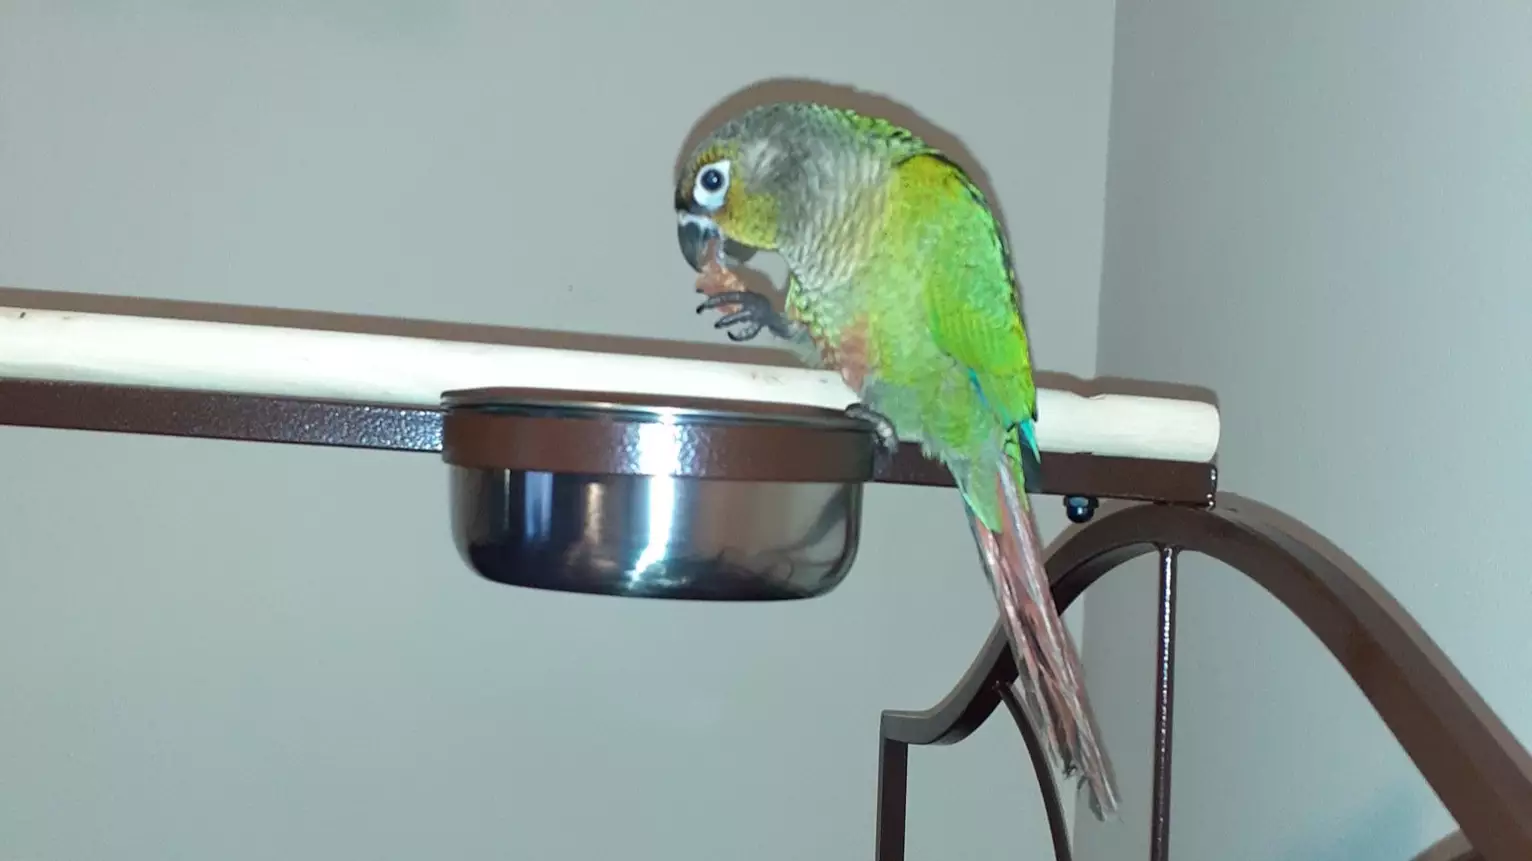 Parrot Hailed Hero For Squawking 'Fire' And Alerting Family To Blaze